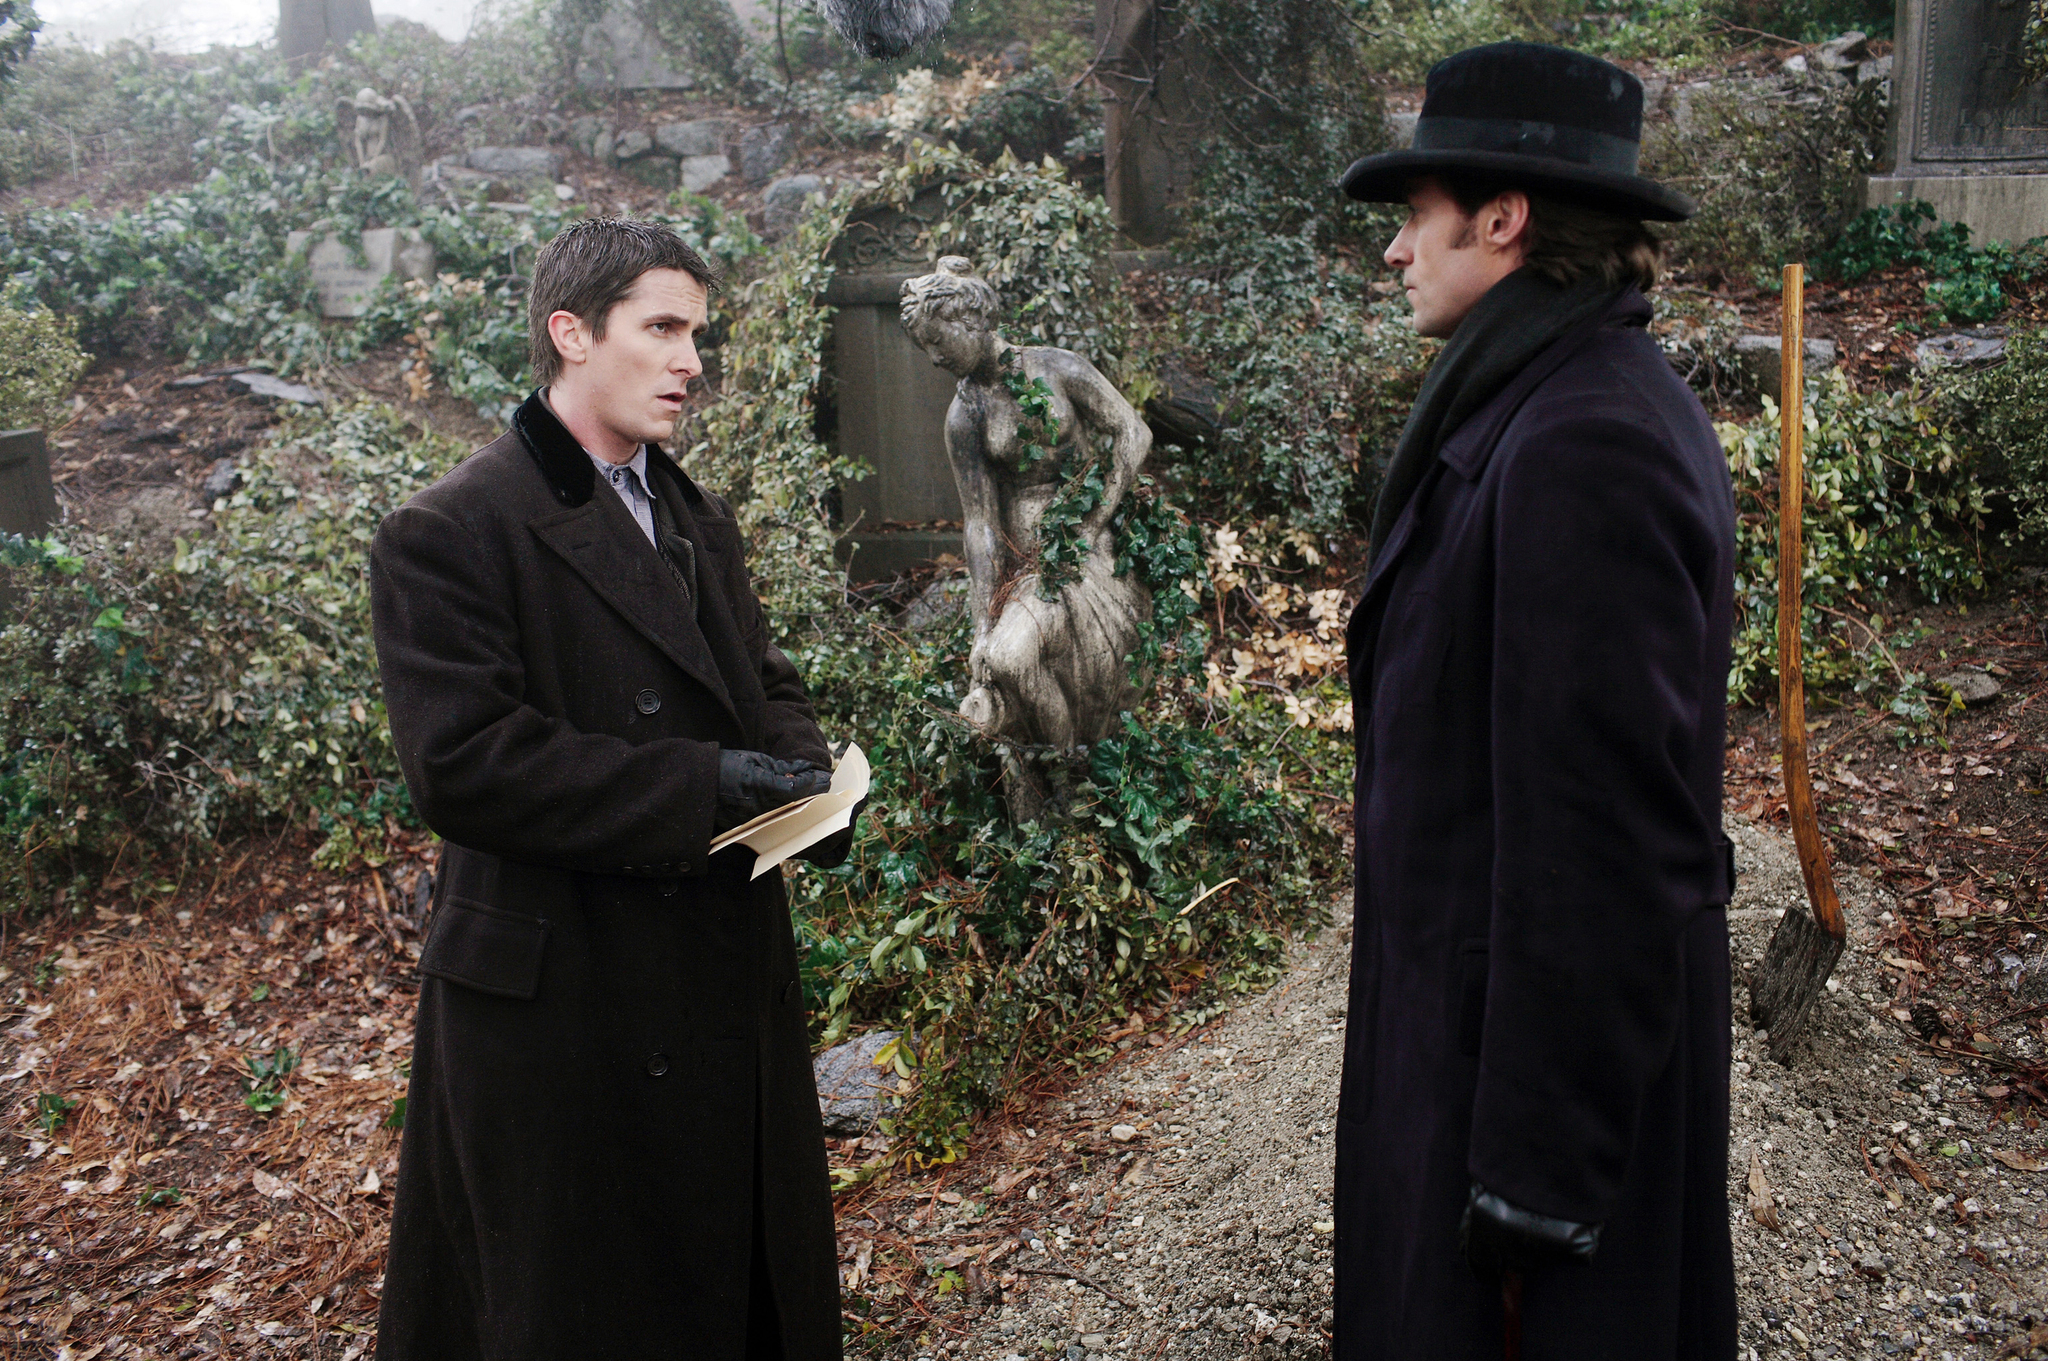 Christian Bale and Hugh Jackman in The Prestige (2006)